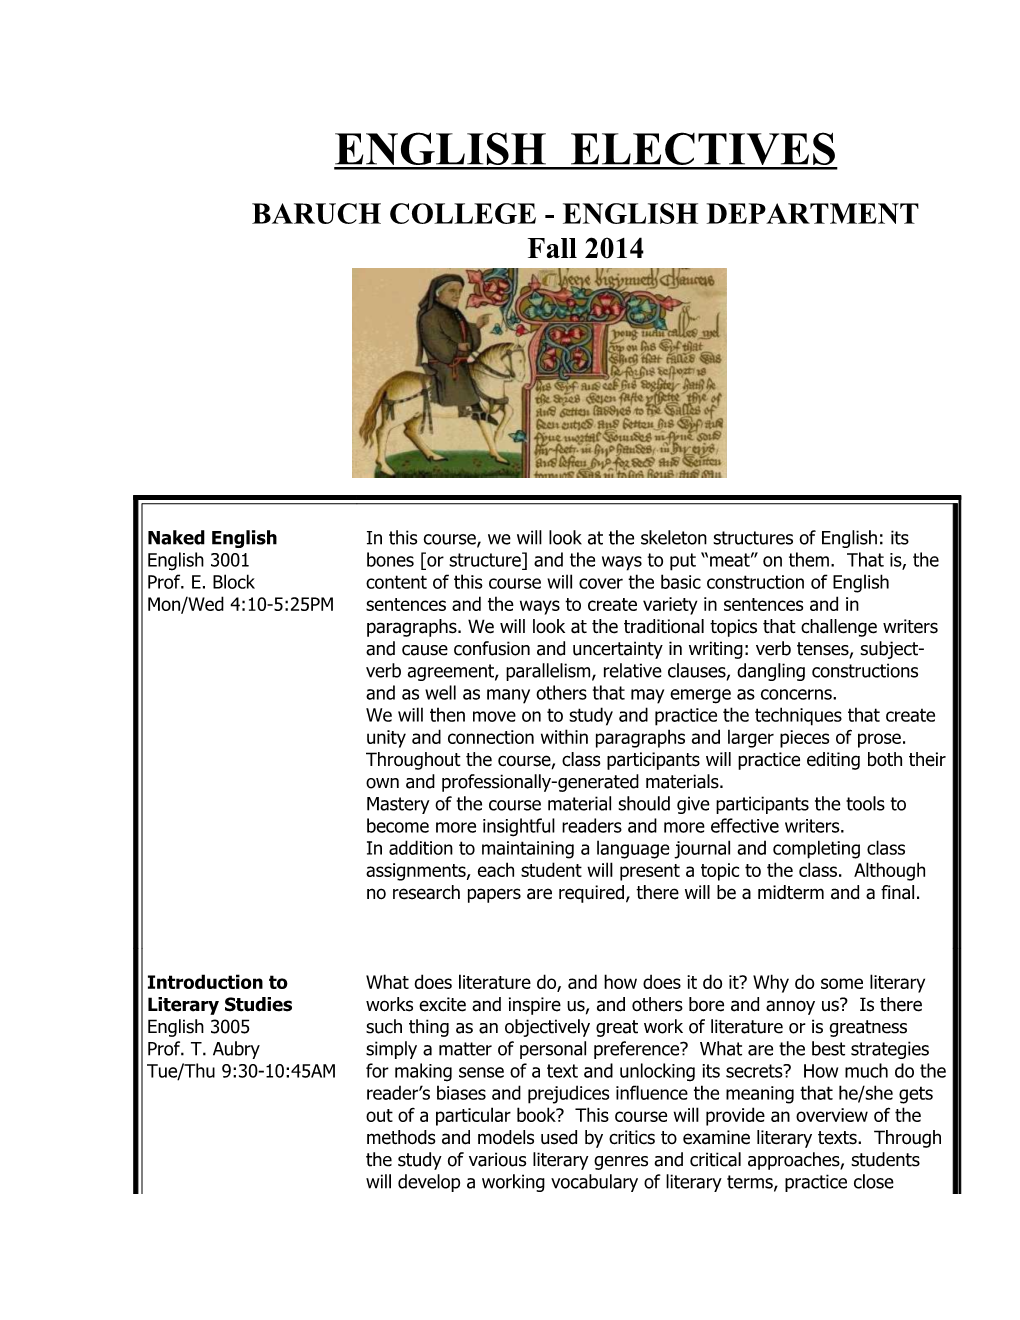 Baruch College - English Department